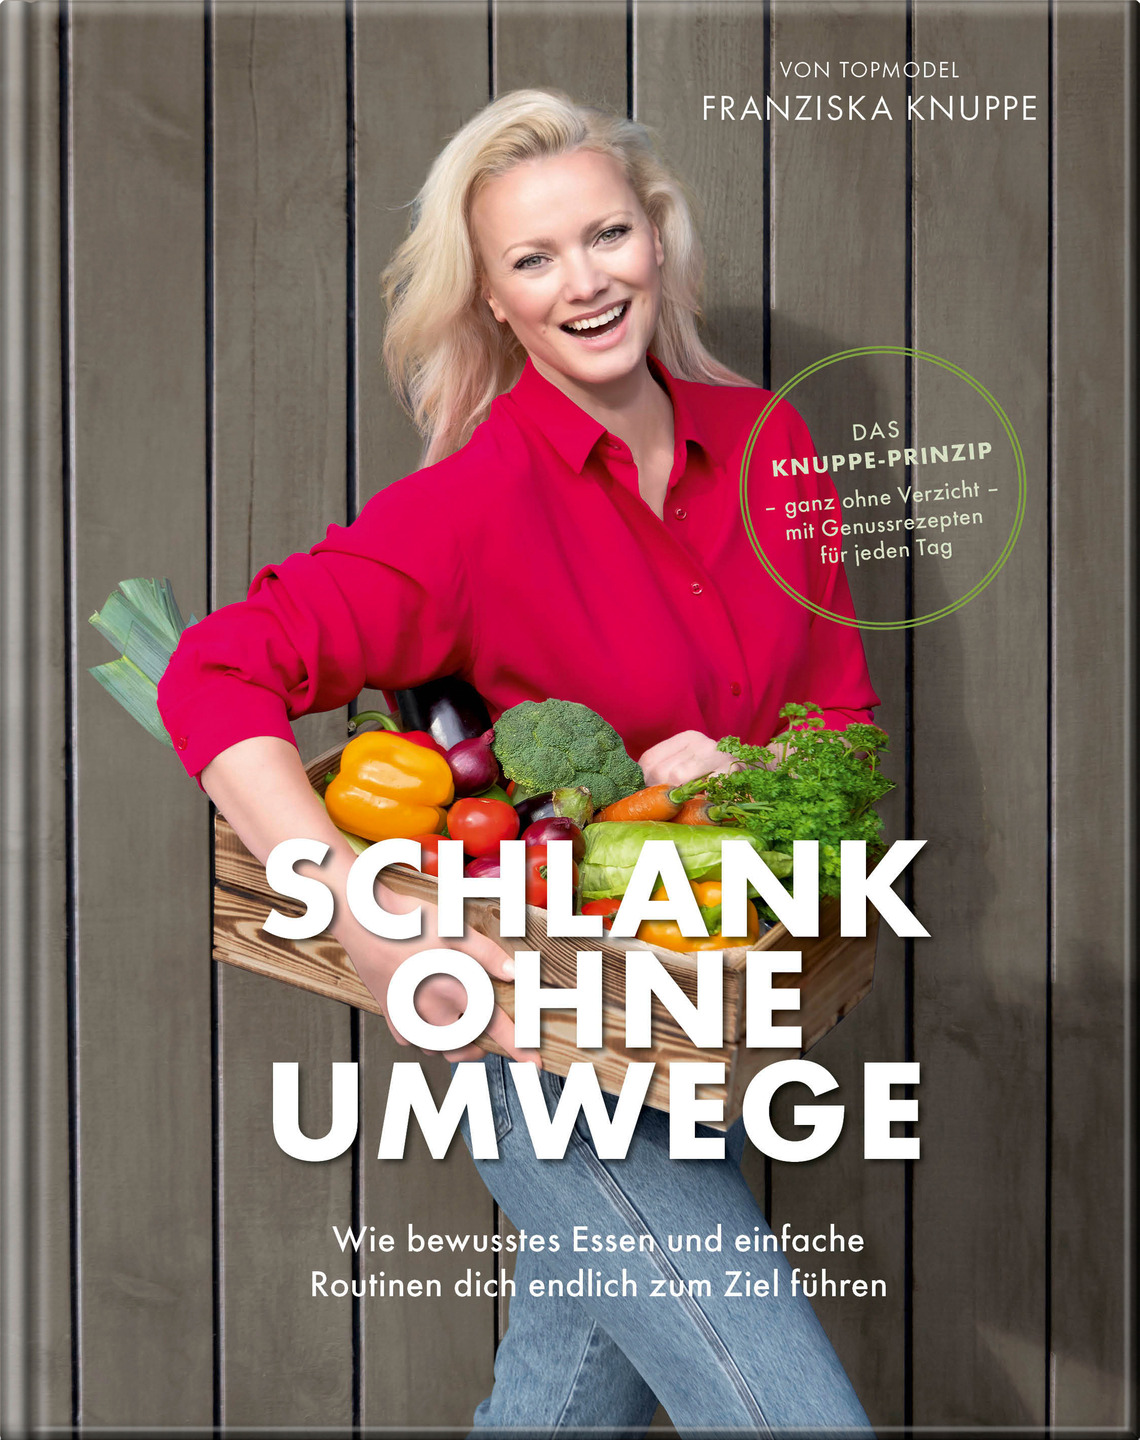 the cover of the book schlank ohne umwege